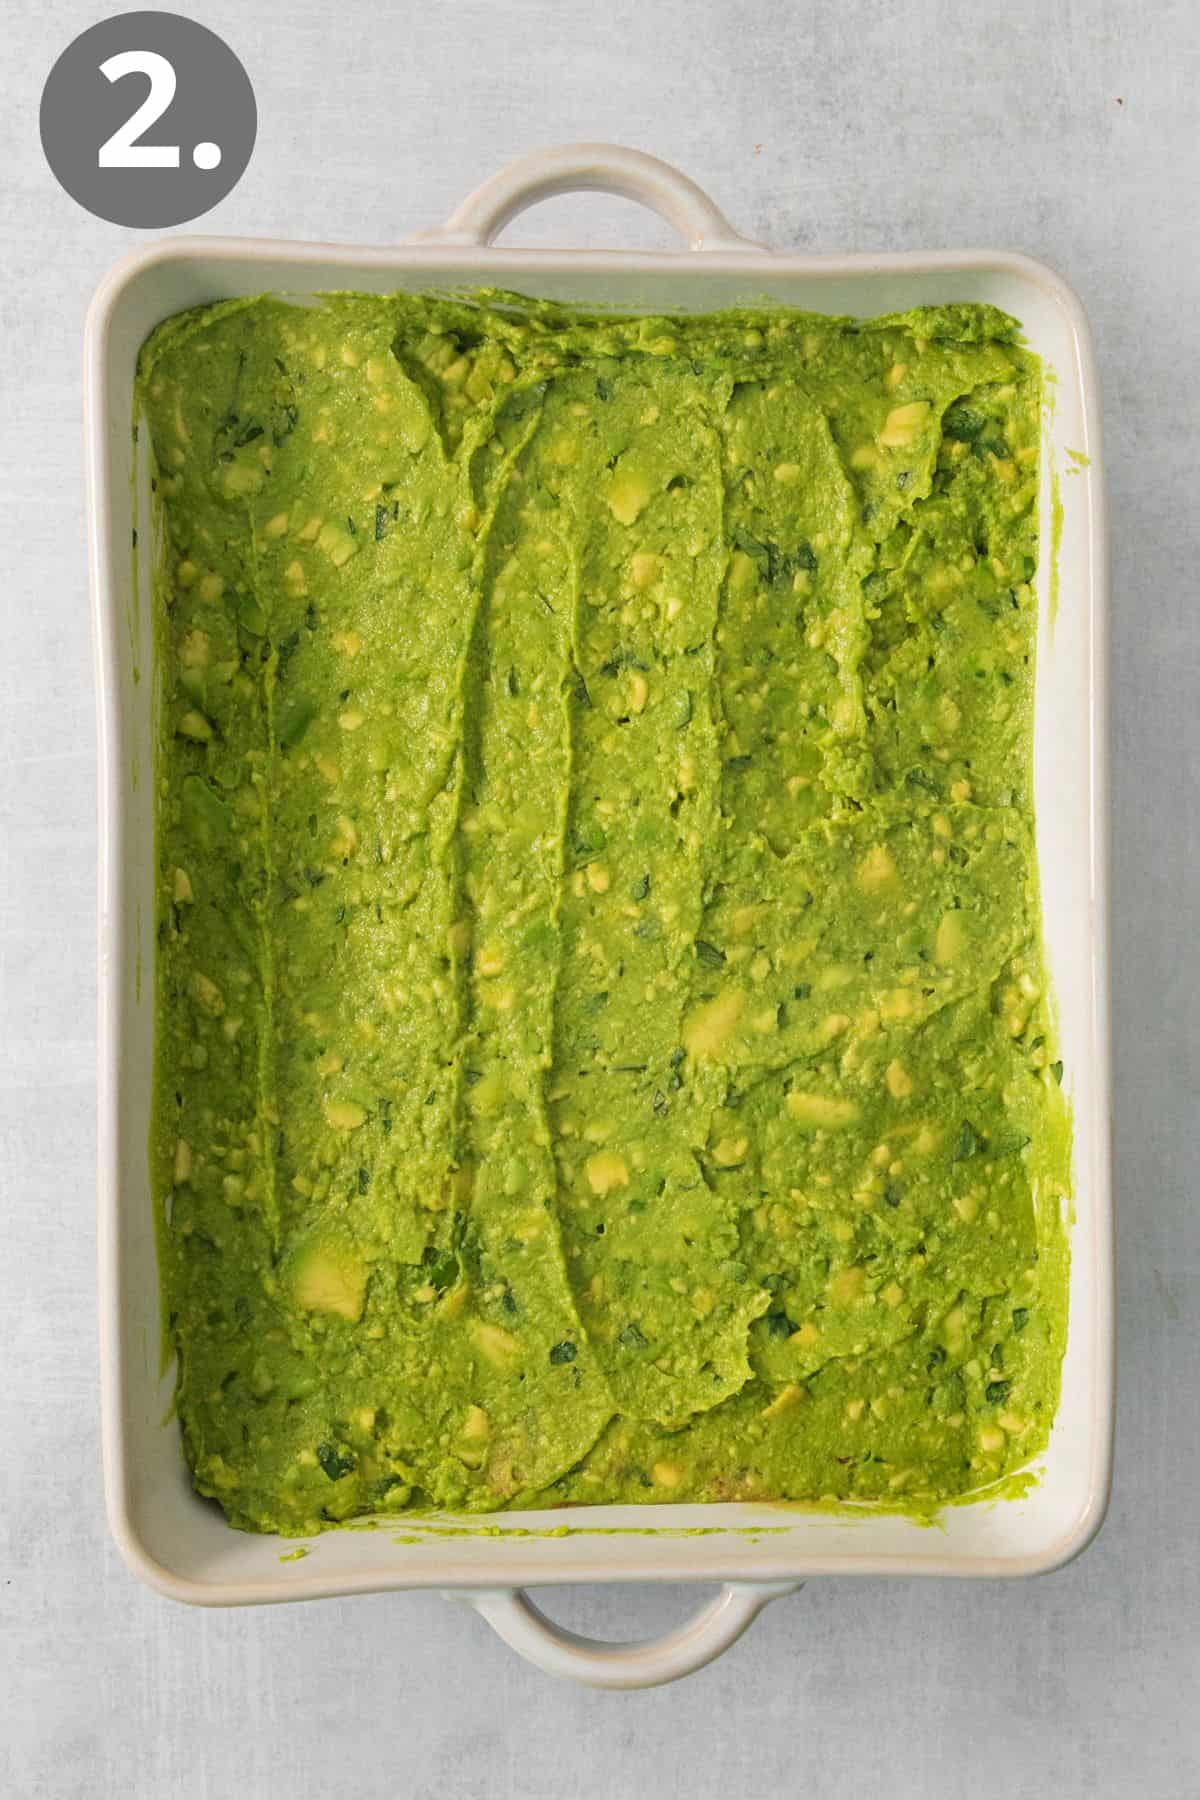 Guacamole layered on top of beans in a baking dish